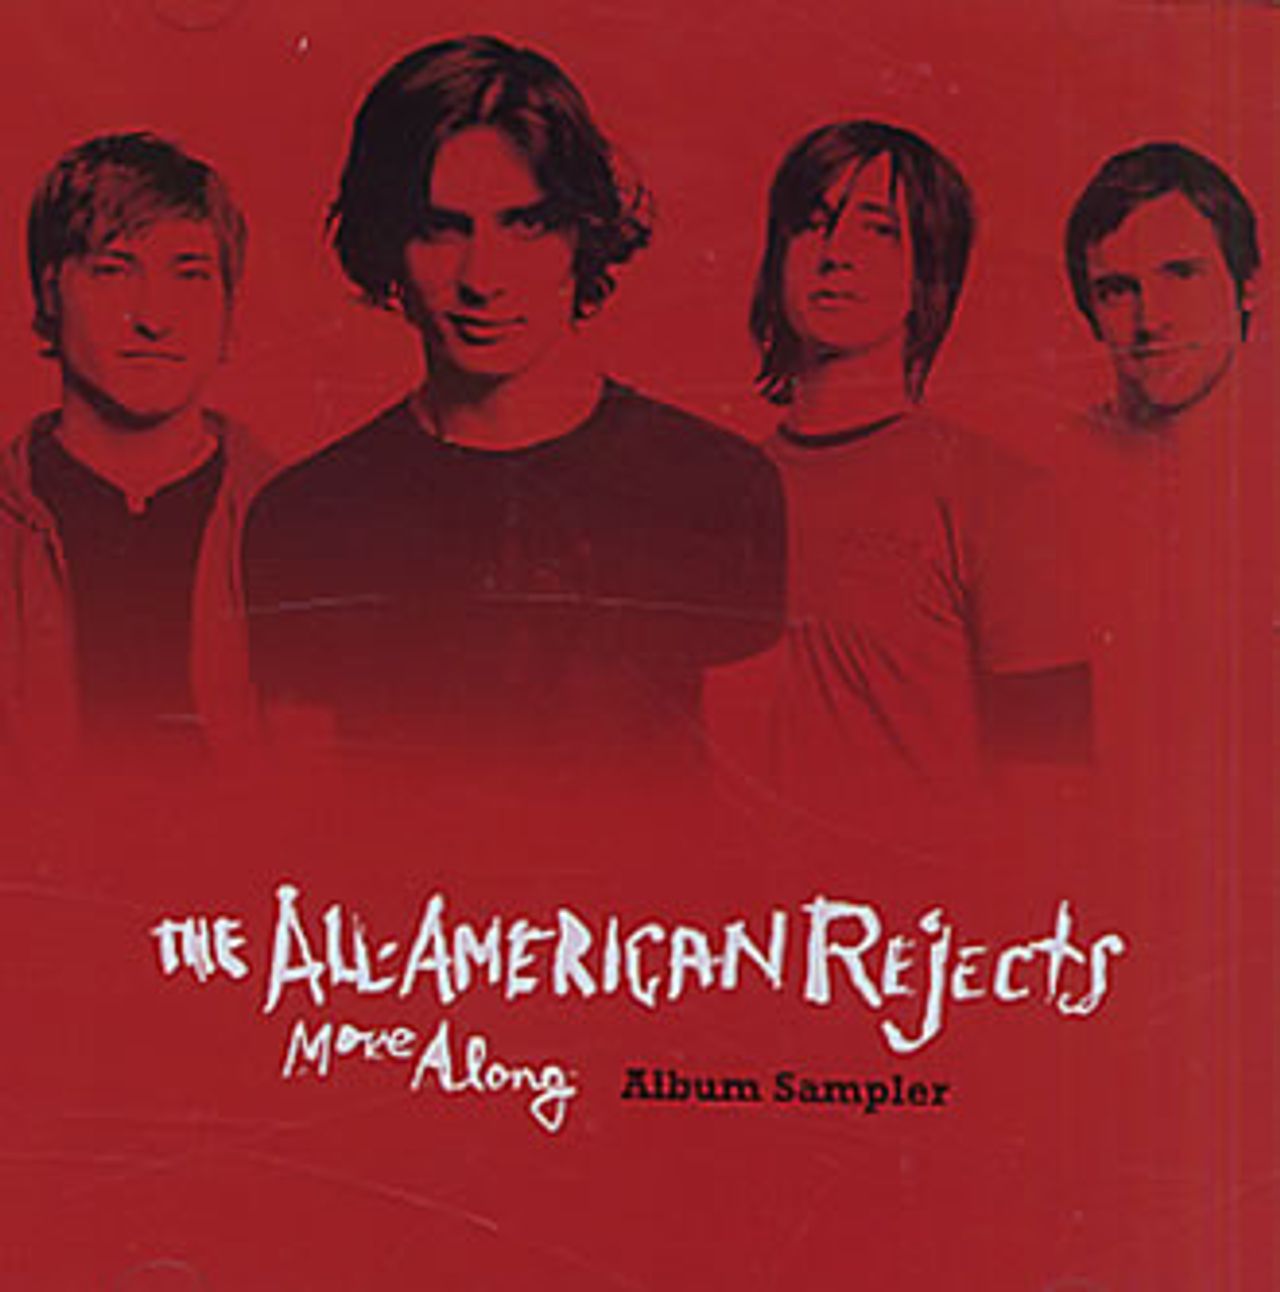 The All-American Rejects Move Along - Album Sampler UK Promo CD single